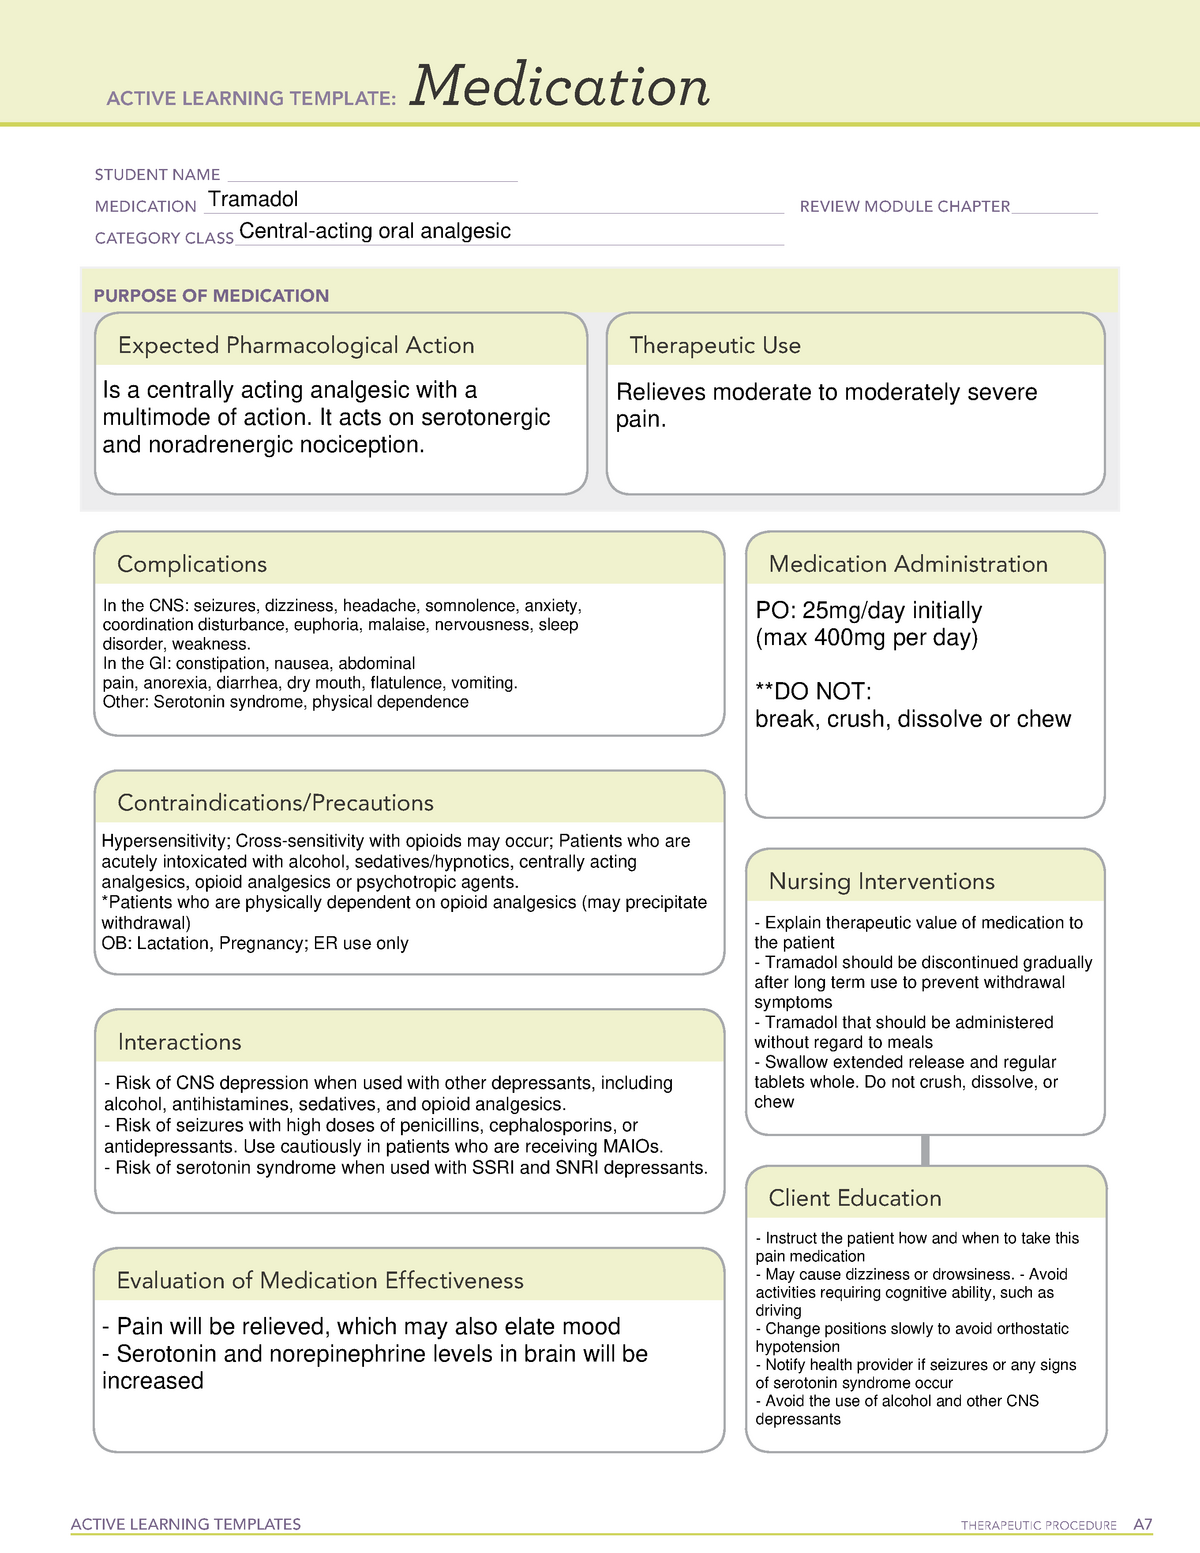 ati-medication-template-1-1-active-learning-templates-therapeutic